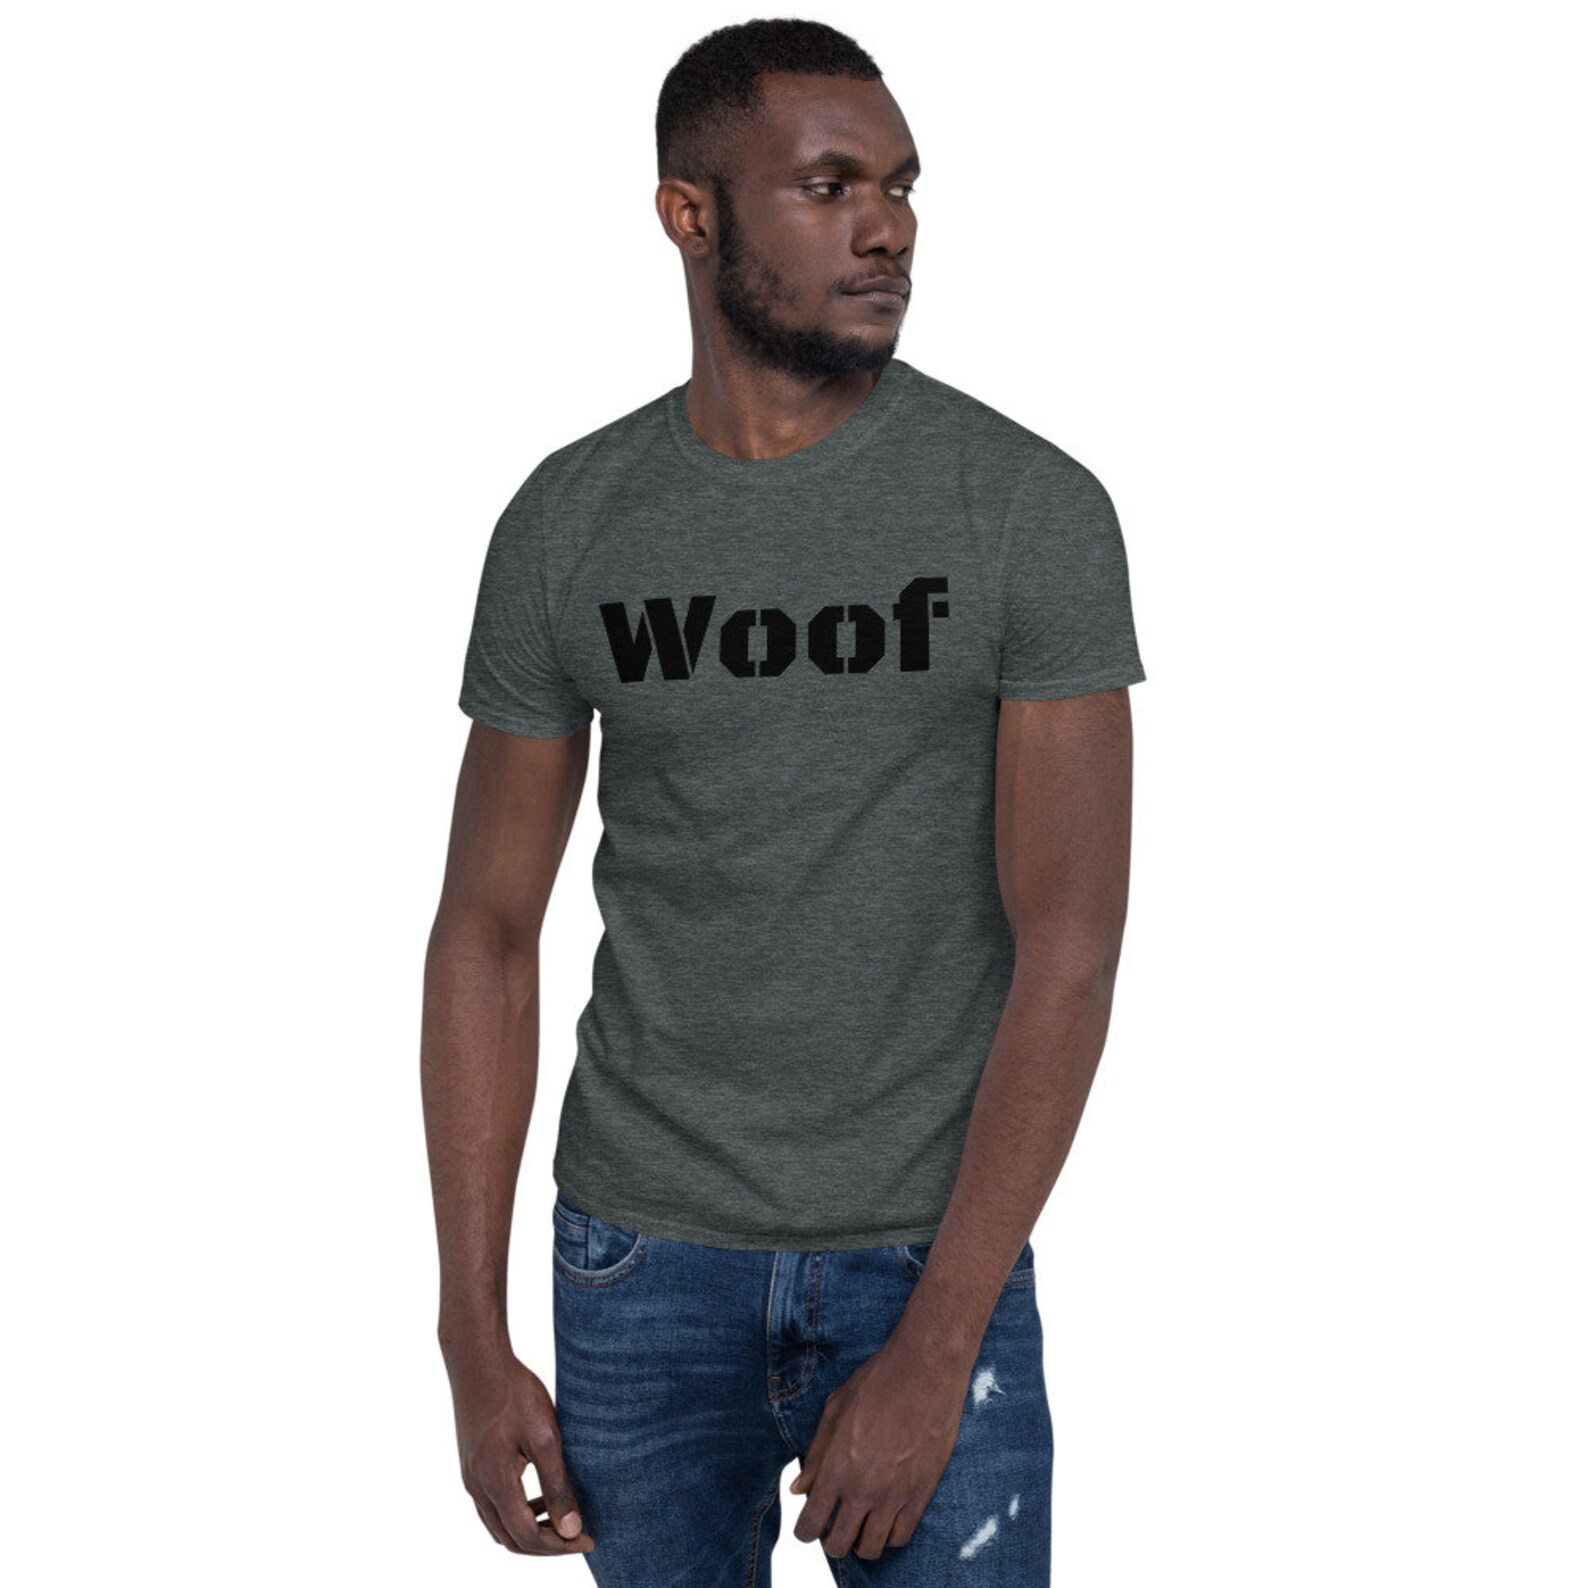 Woof T-shirt Gay Gay Pride Daddy Pup Puppy Puppy Play - Etsy